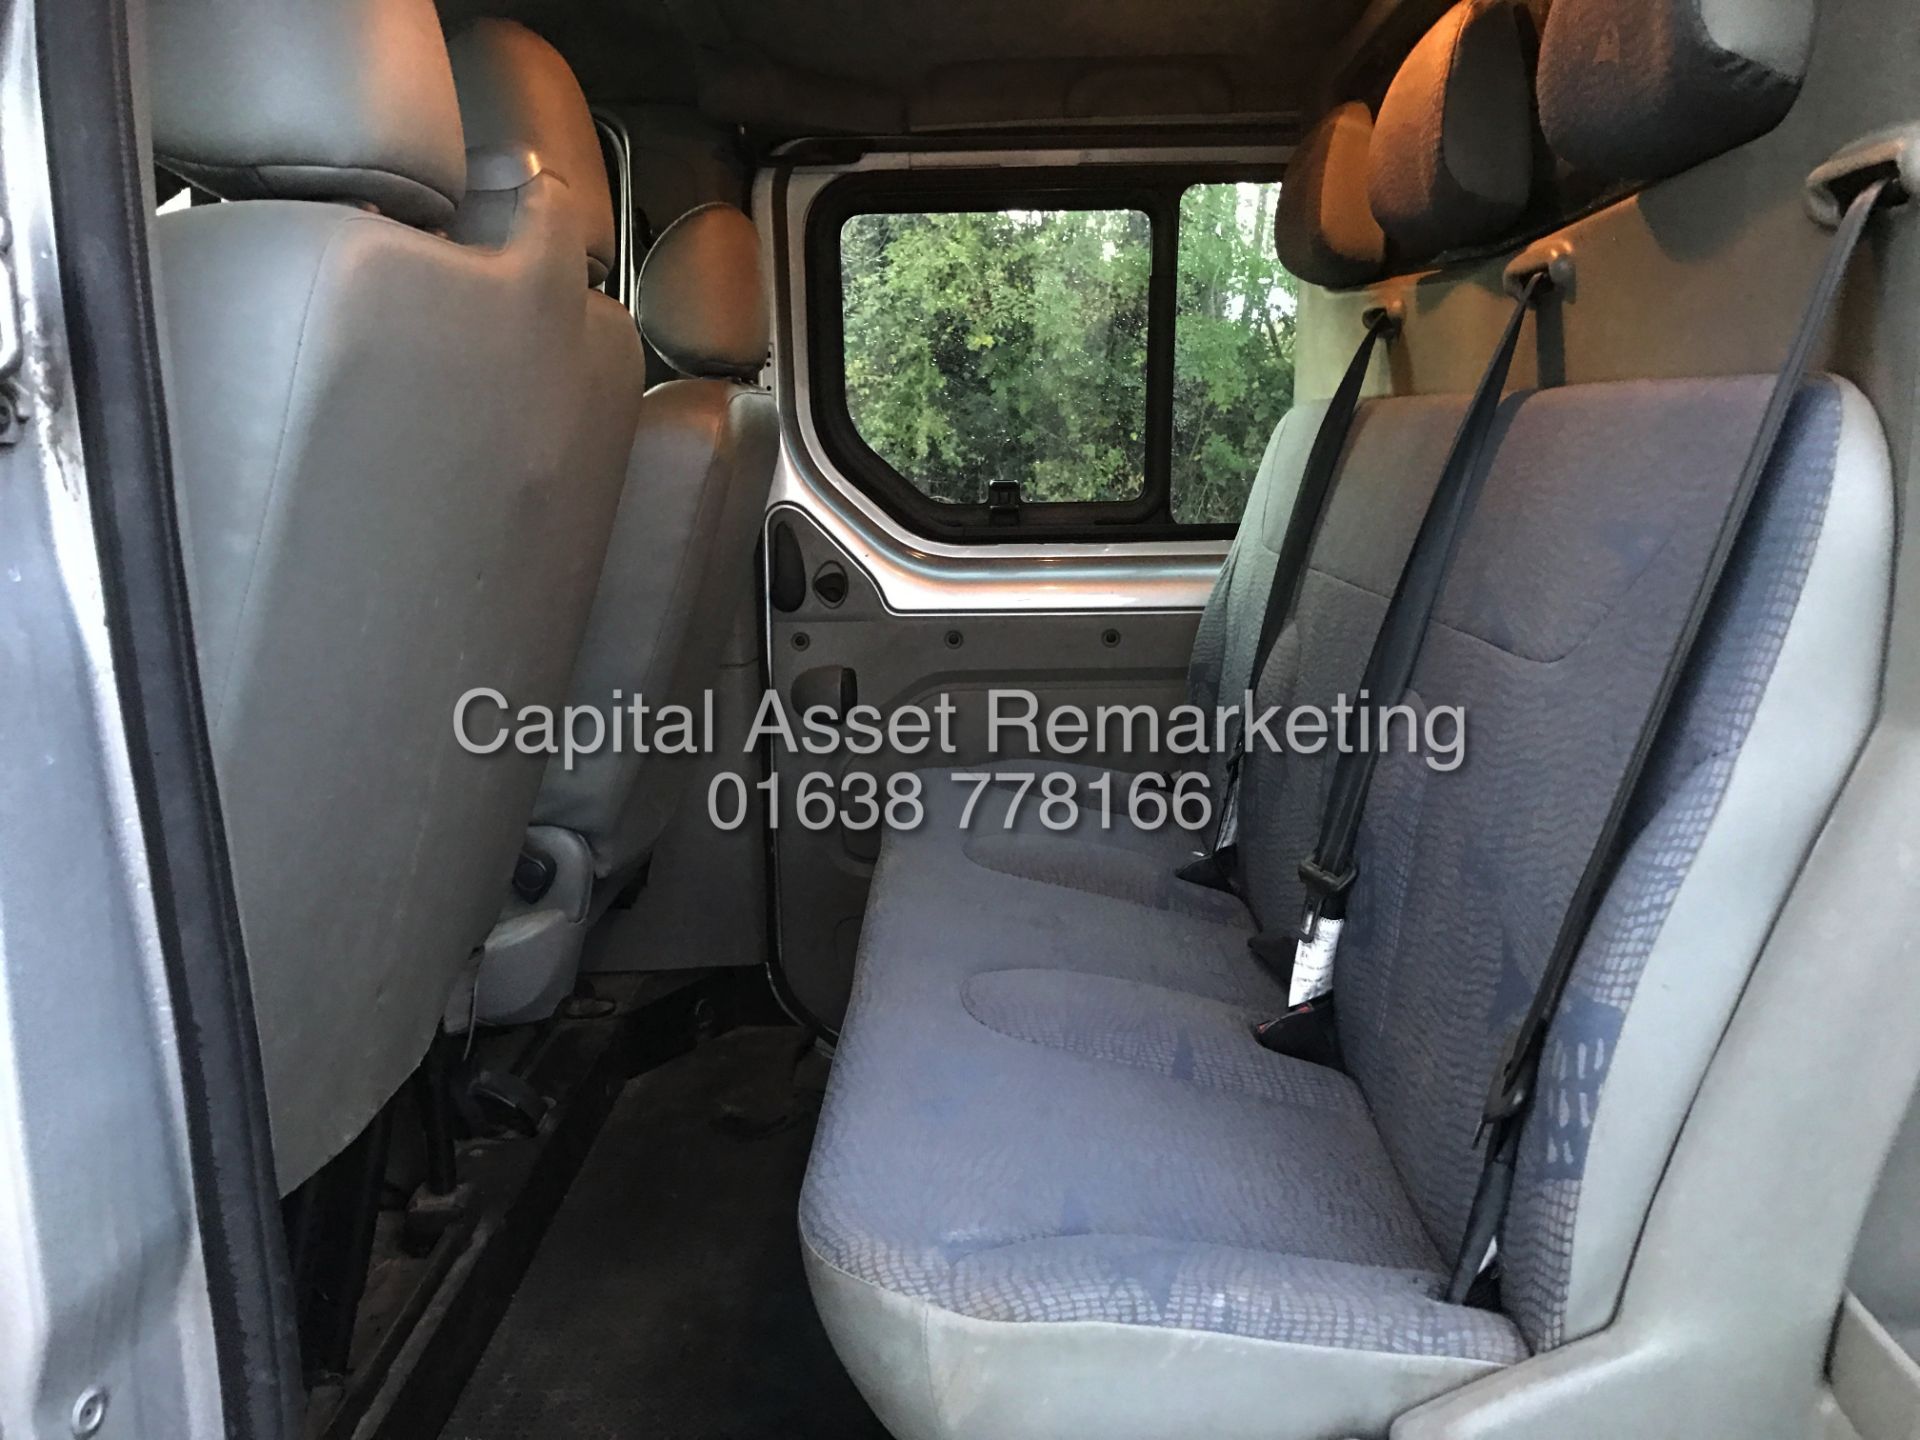 On Sale RENAULT TRAFIC 1.9DCI LONG WHEEL BASE DUELINER 6 SEATER - 05 REG - SILVER - AIR CON - WOW!!! - Image 18 of 19